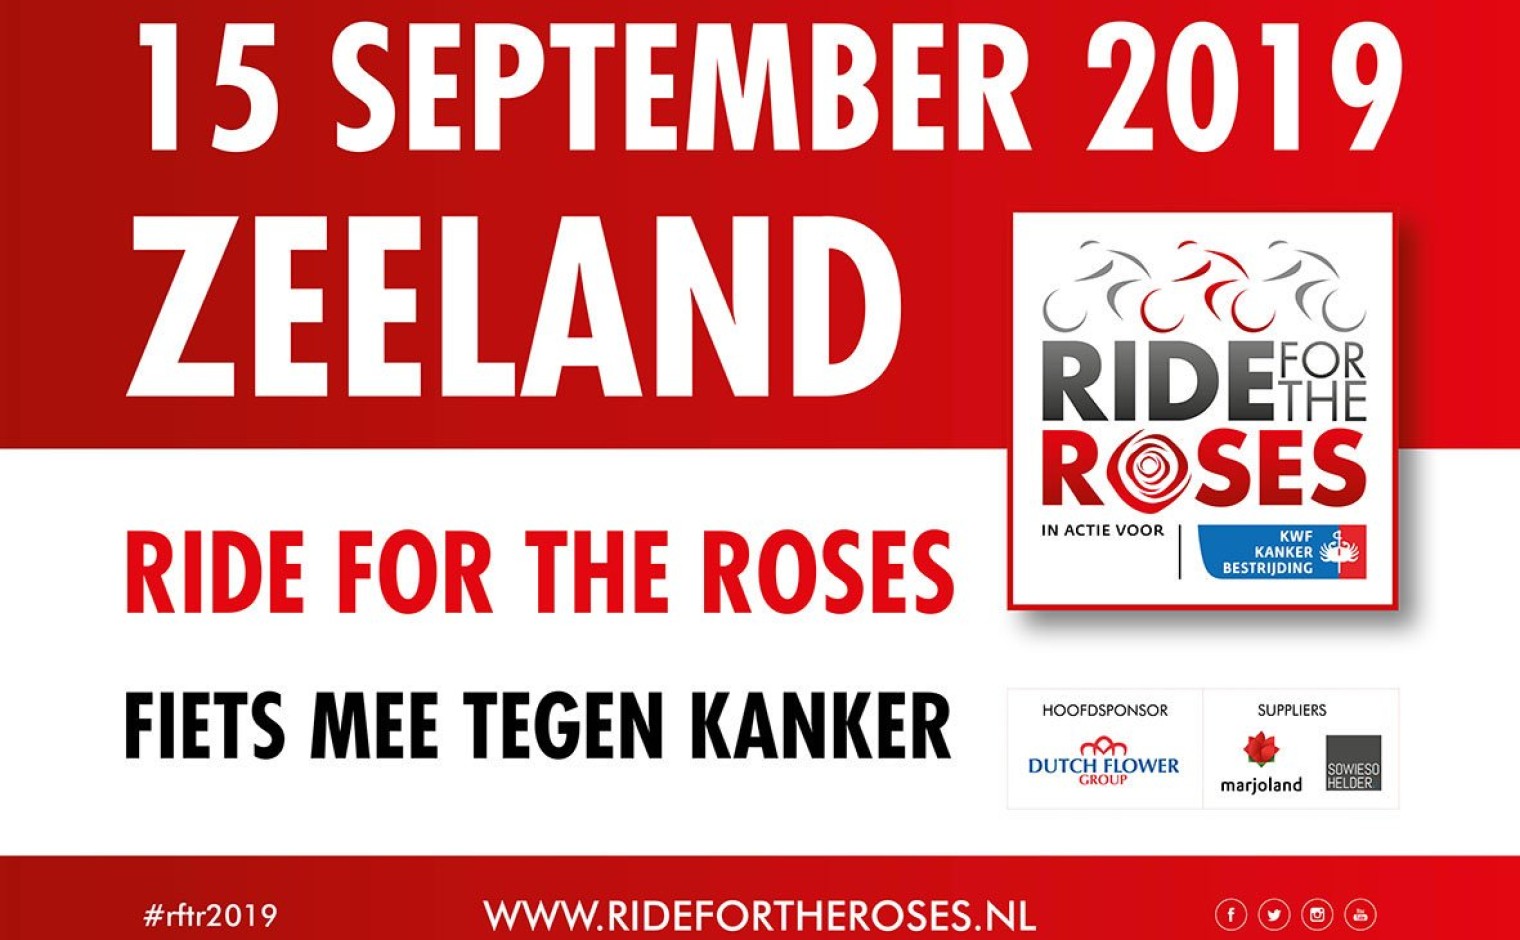 Affiche voor de Ride for the Roses, 15 september 2019 in Goes.